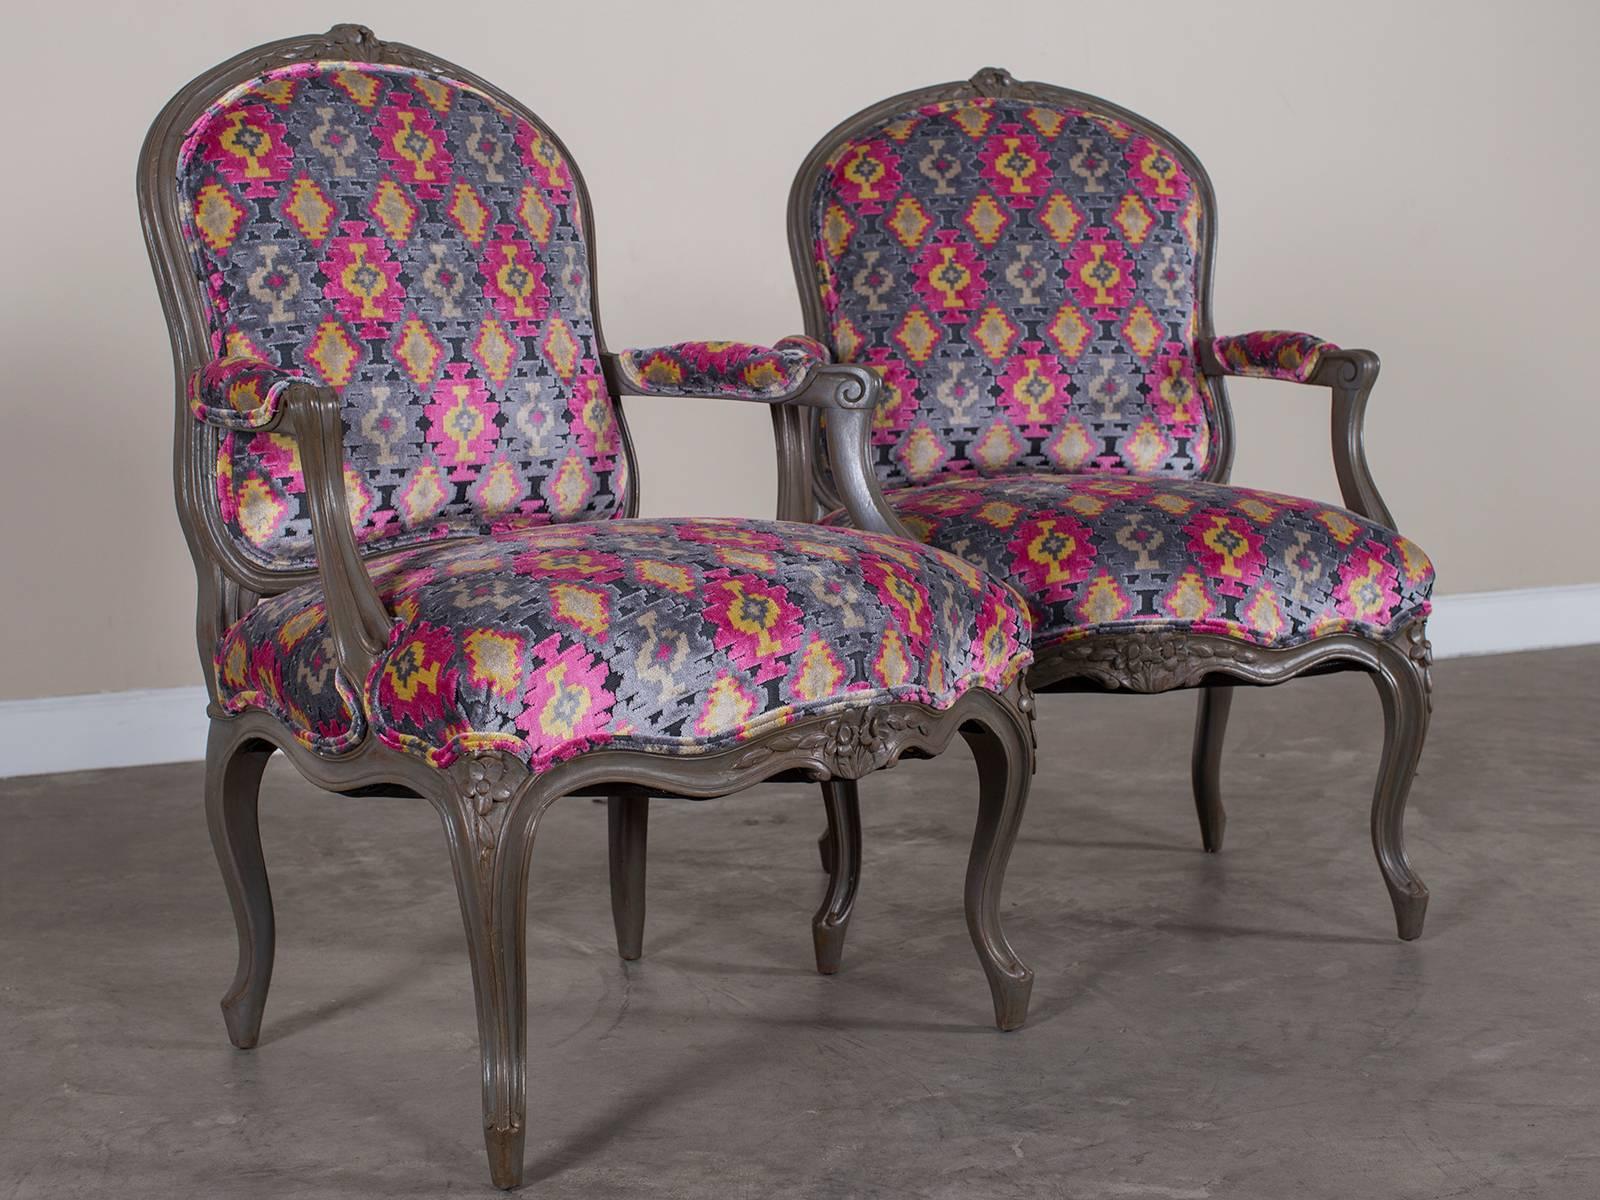 Hand-Painted Pair of Antique French Louis XV Style Painted Armchairs, circa 1875